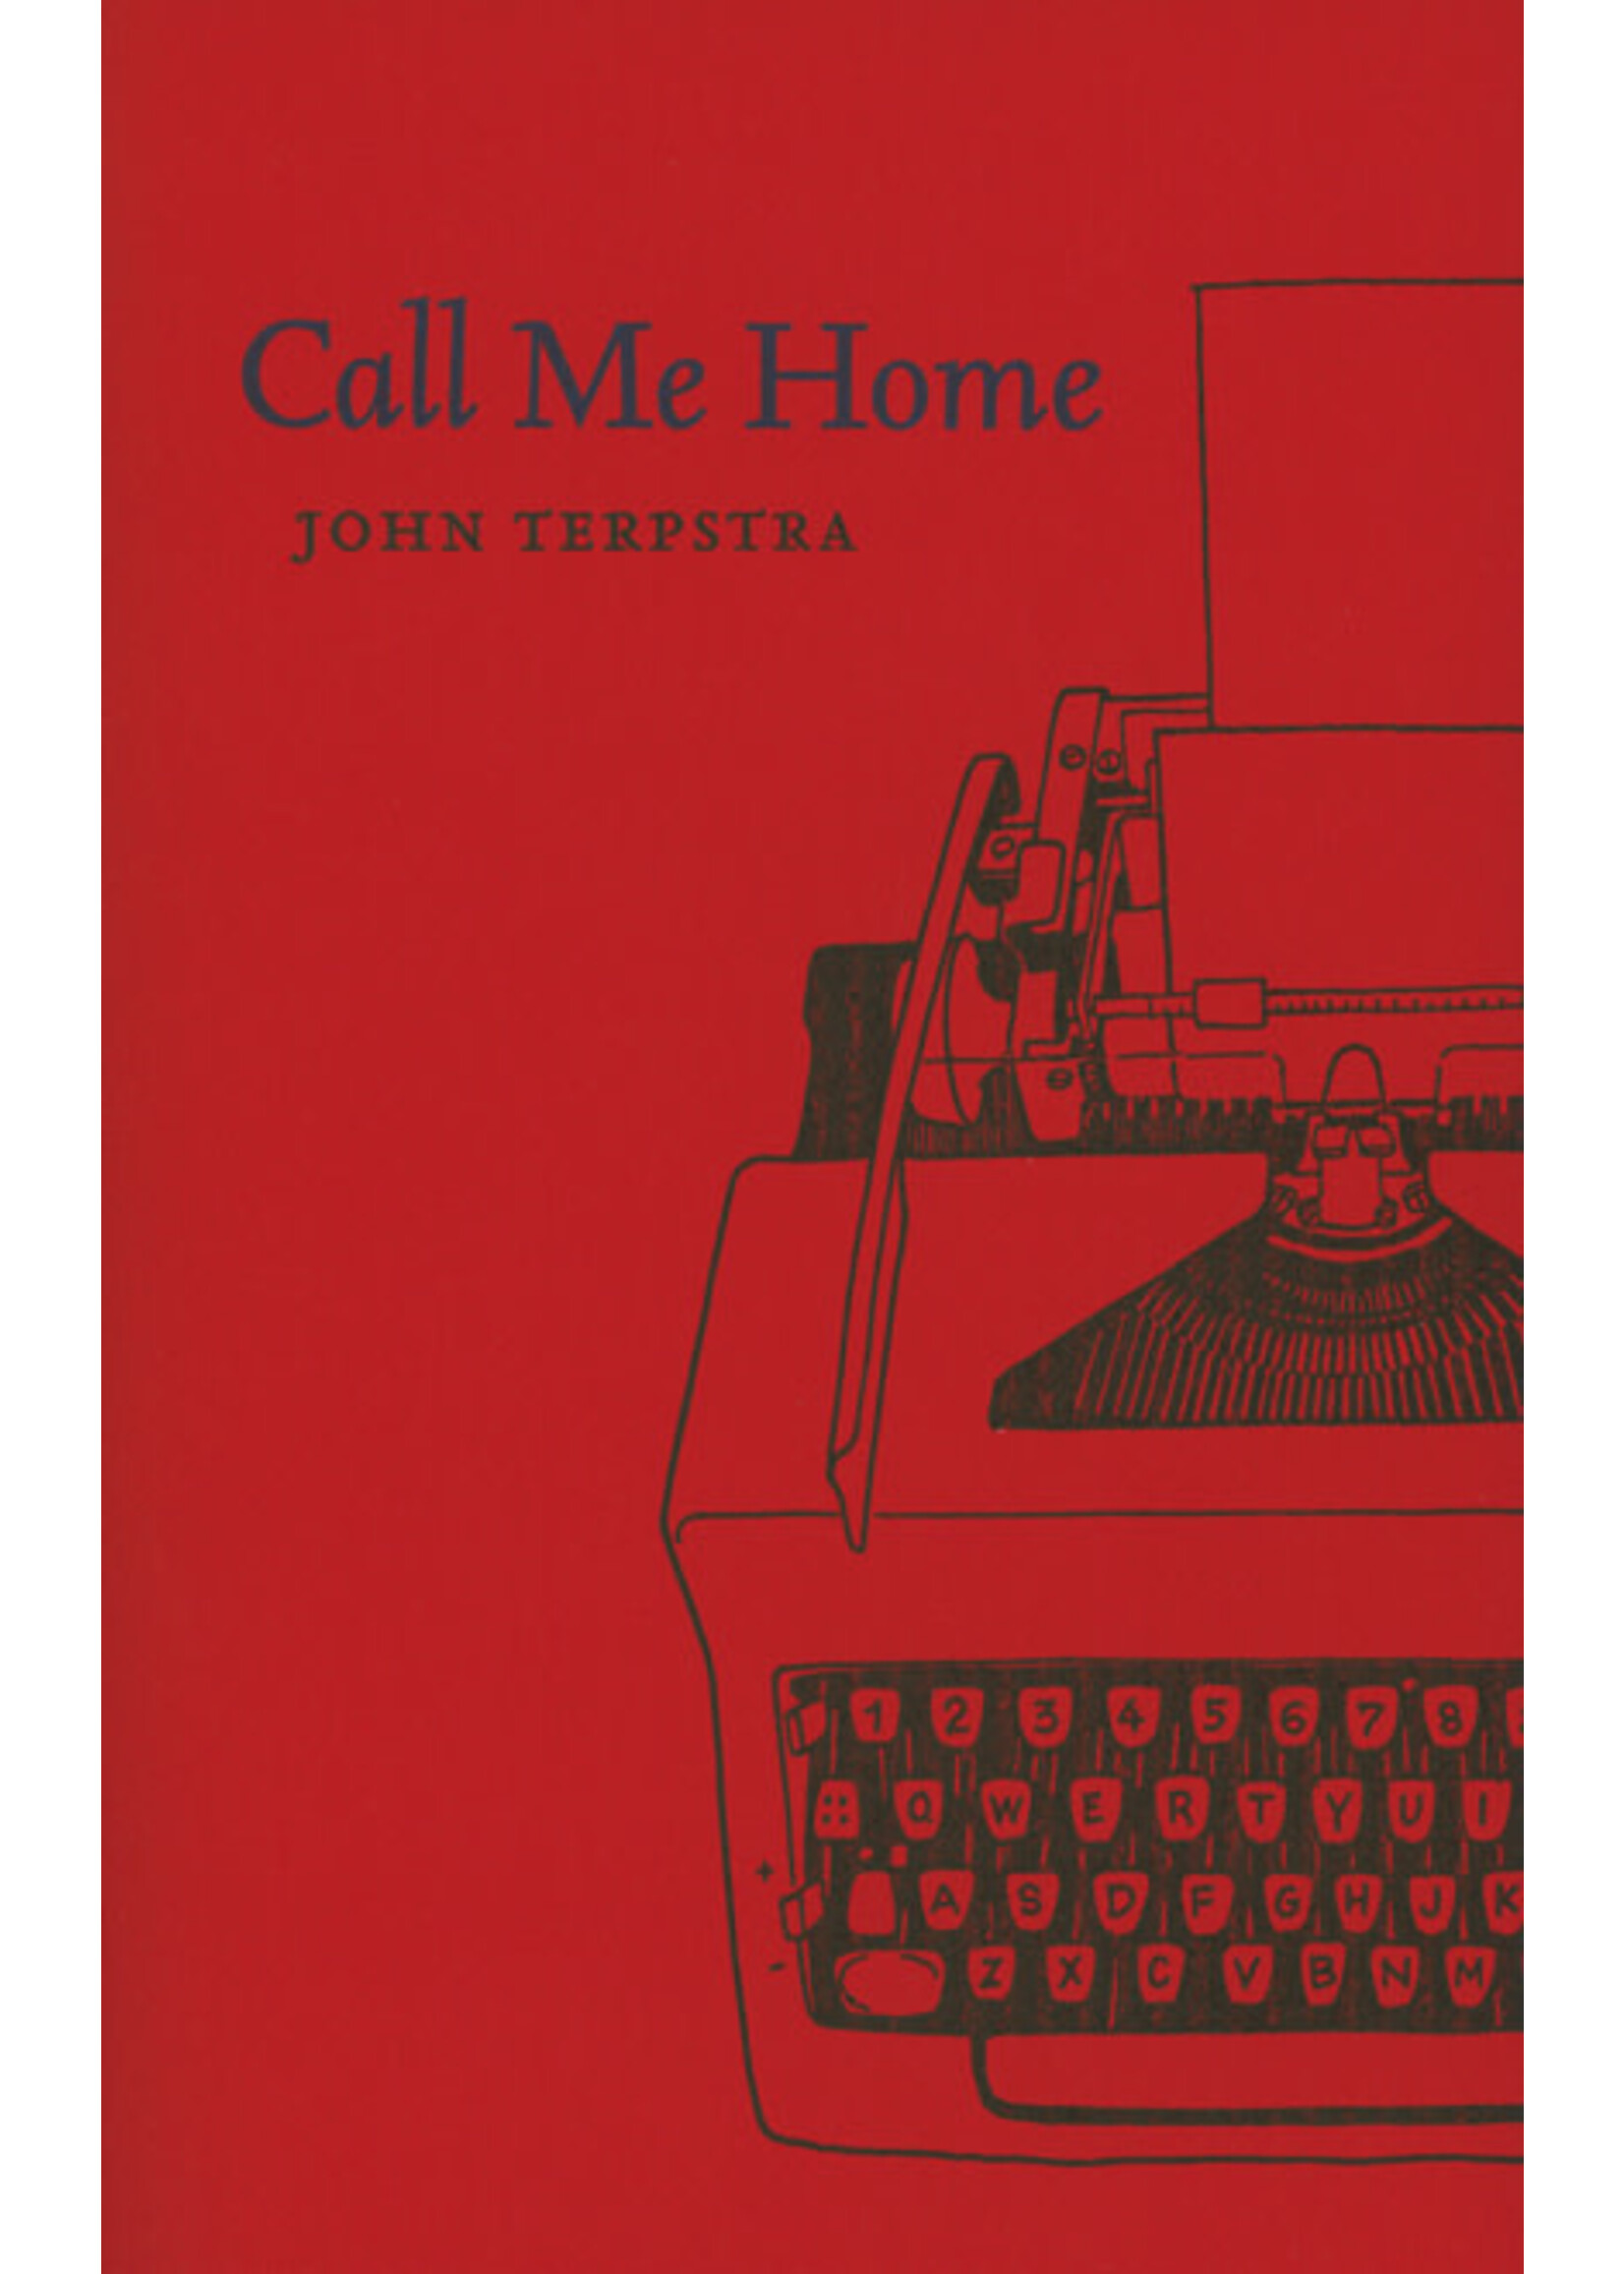 Call Me Home by John Terpstra